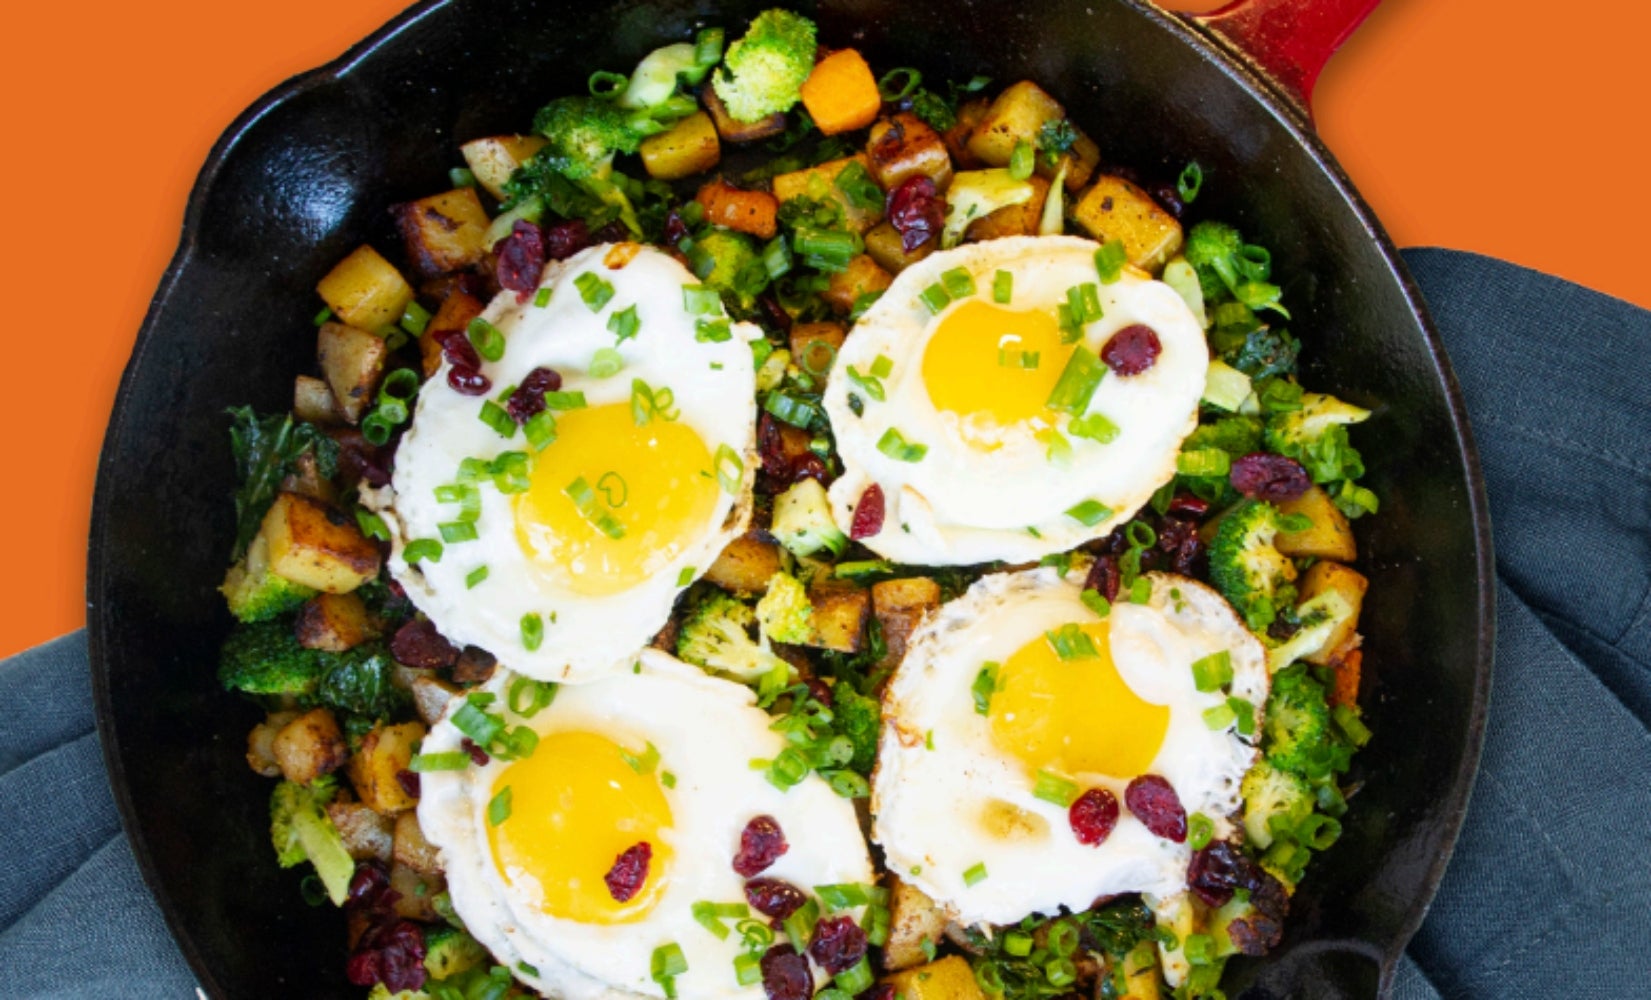 Make This Morning Veggie Hash Recipe From Kidstir With The Last Of Your Thanksgiving Leftovers